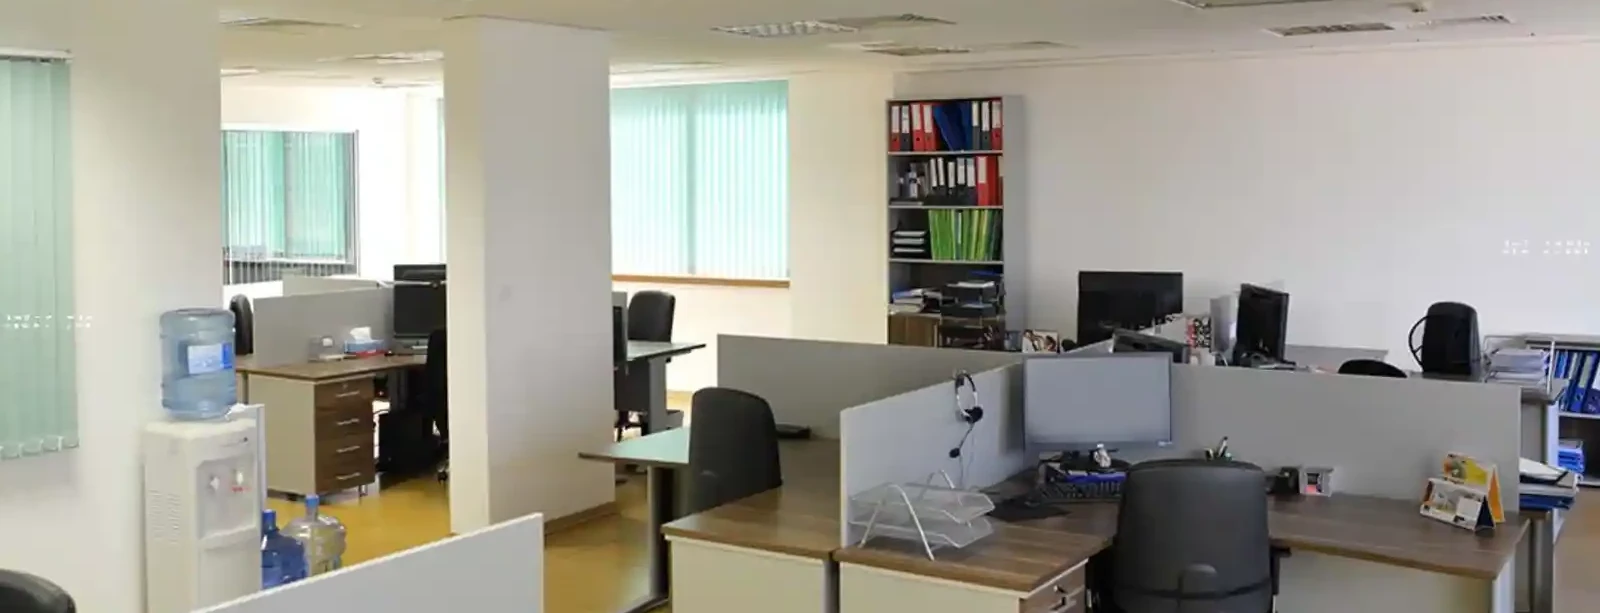 The entire floor office space of 872 sq.m €4.500.000, image 1